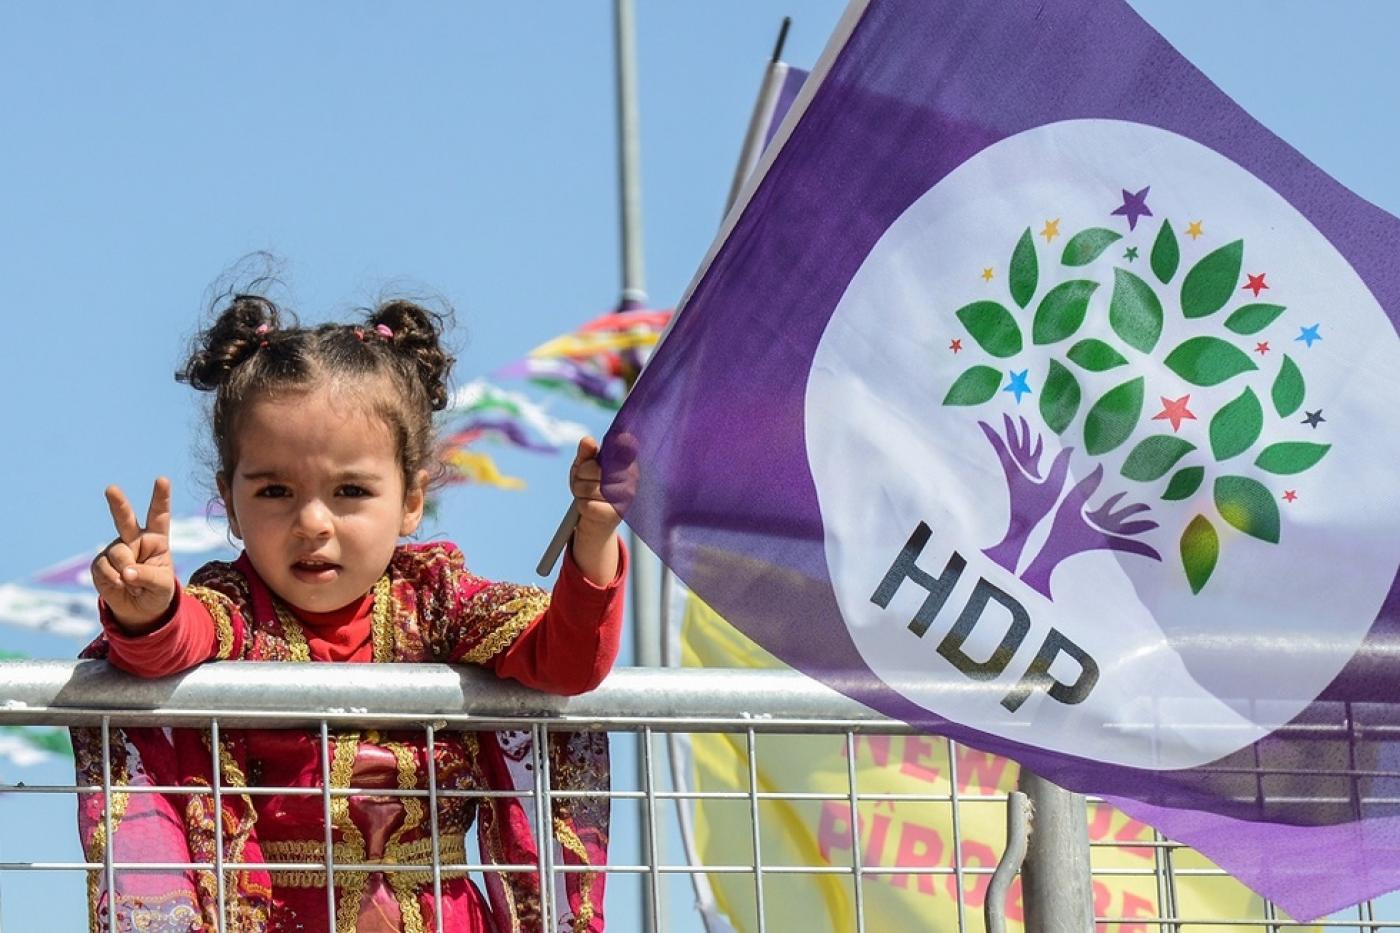 Turkey’s pro-Kurdish party under pressure as calls increase for its closure / Diego Cupolo